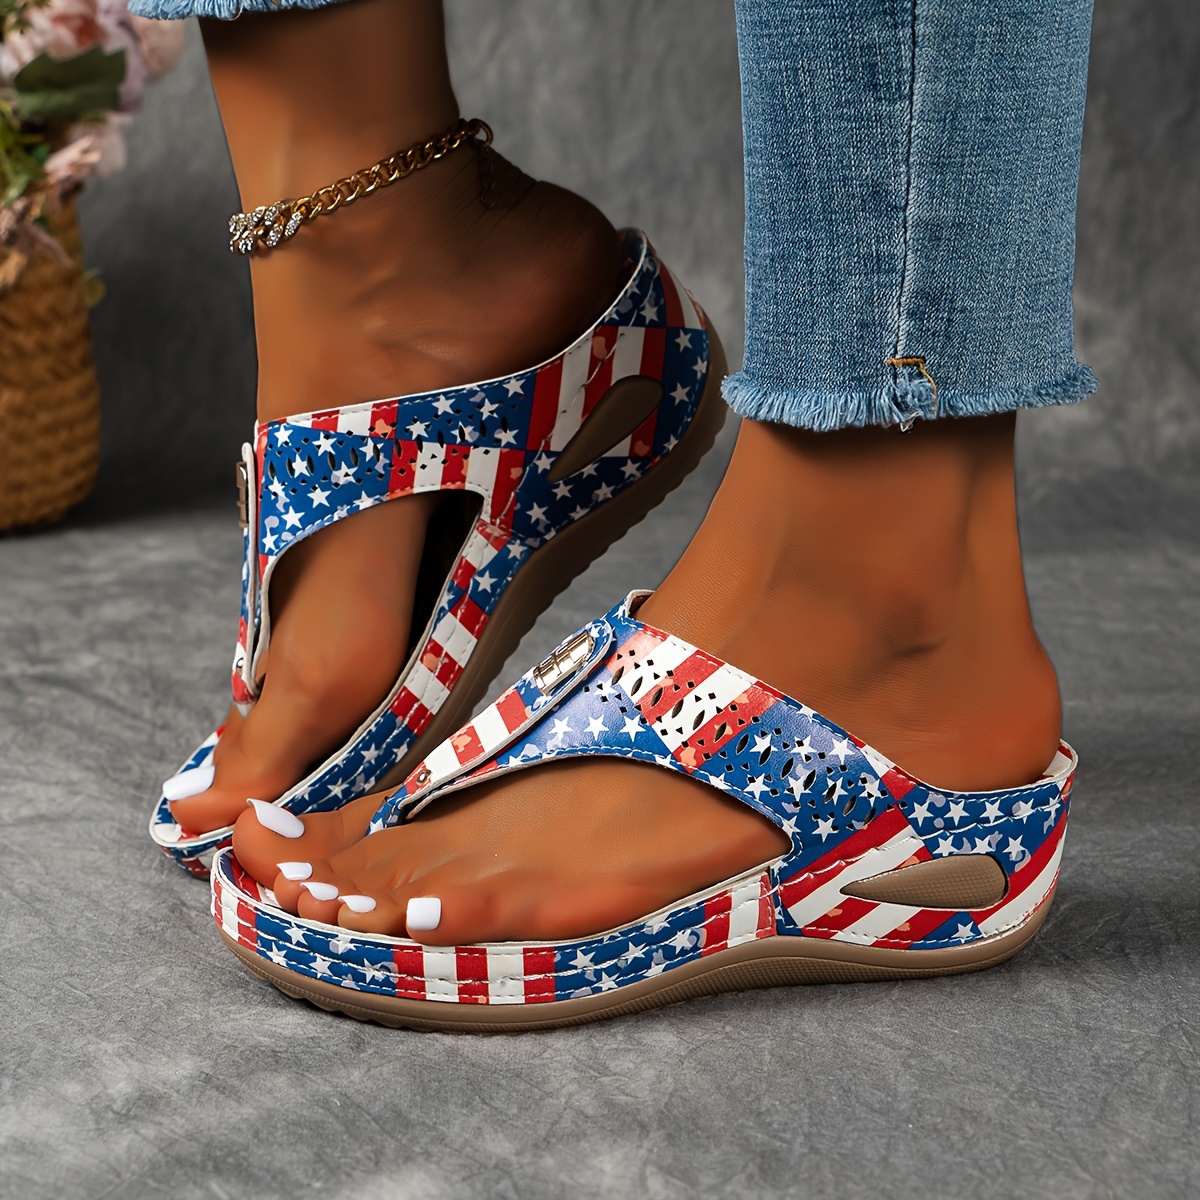 

Women's American Flag Print Flip-flops, Summer Beach Thong Sandals With Comfortable Sole, Casual Outdoor Footwear, Stars And Stripes Design, Us Flag Shoes